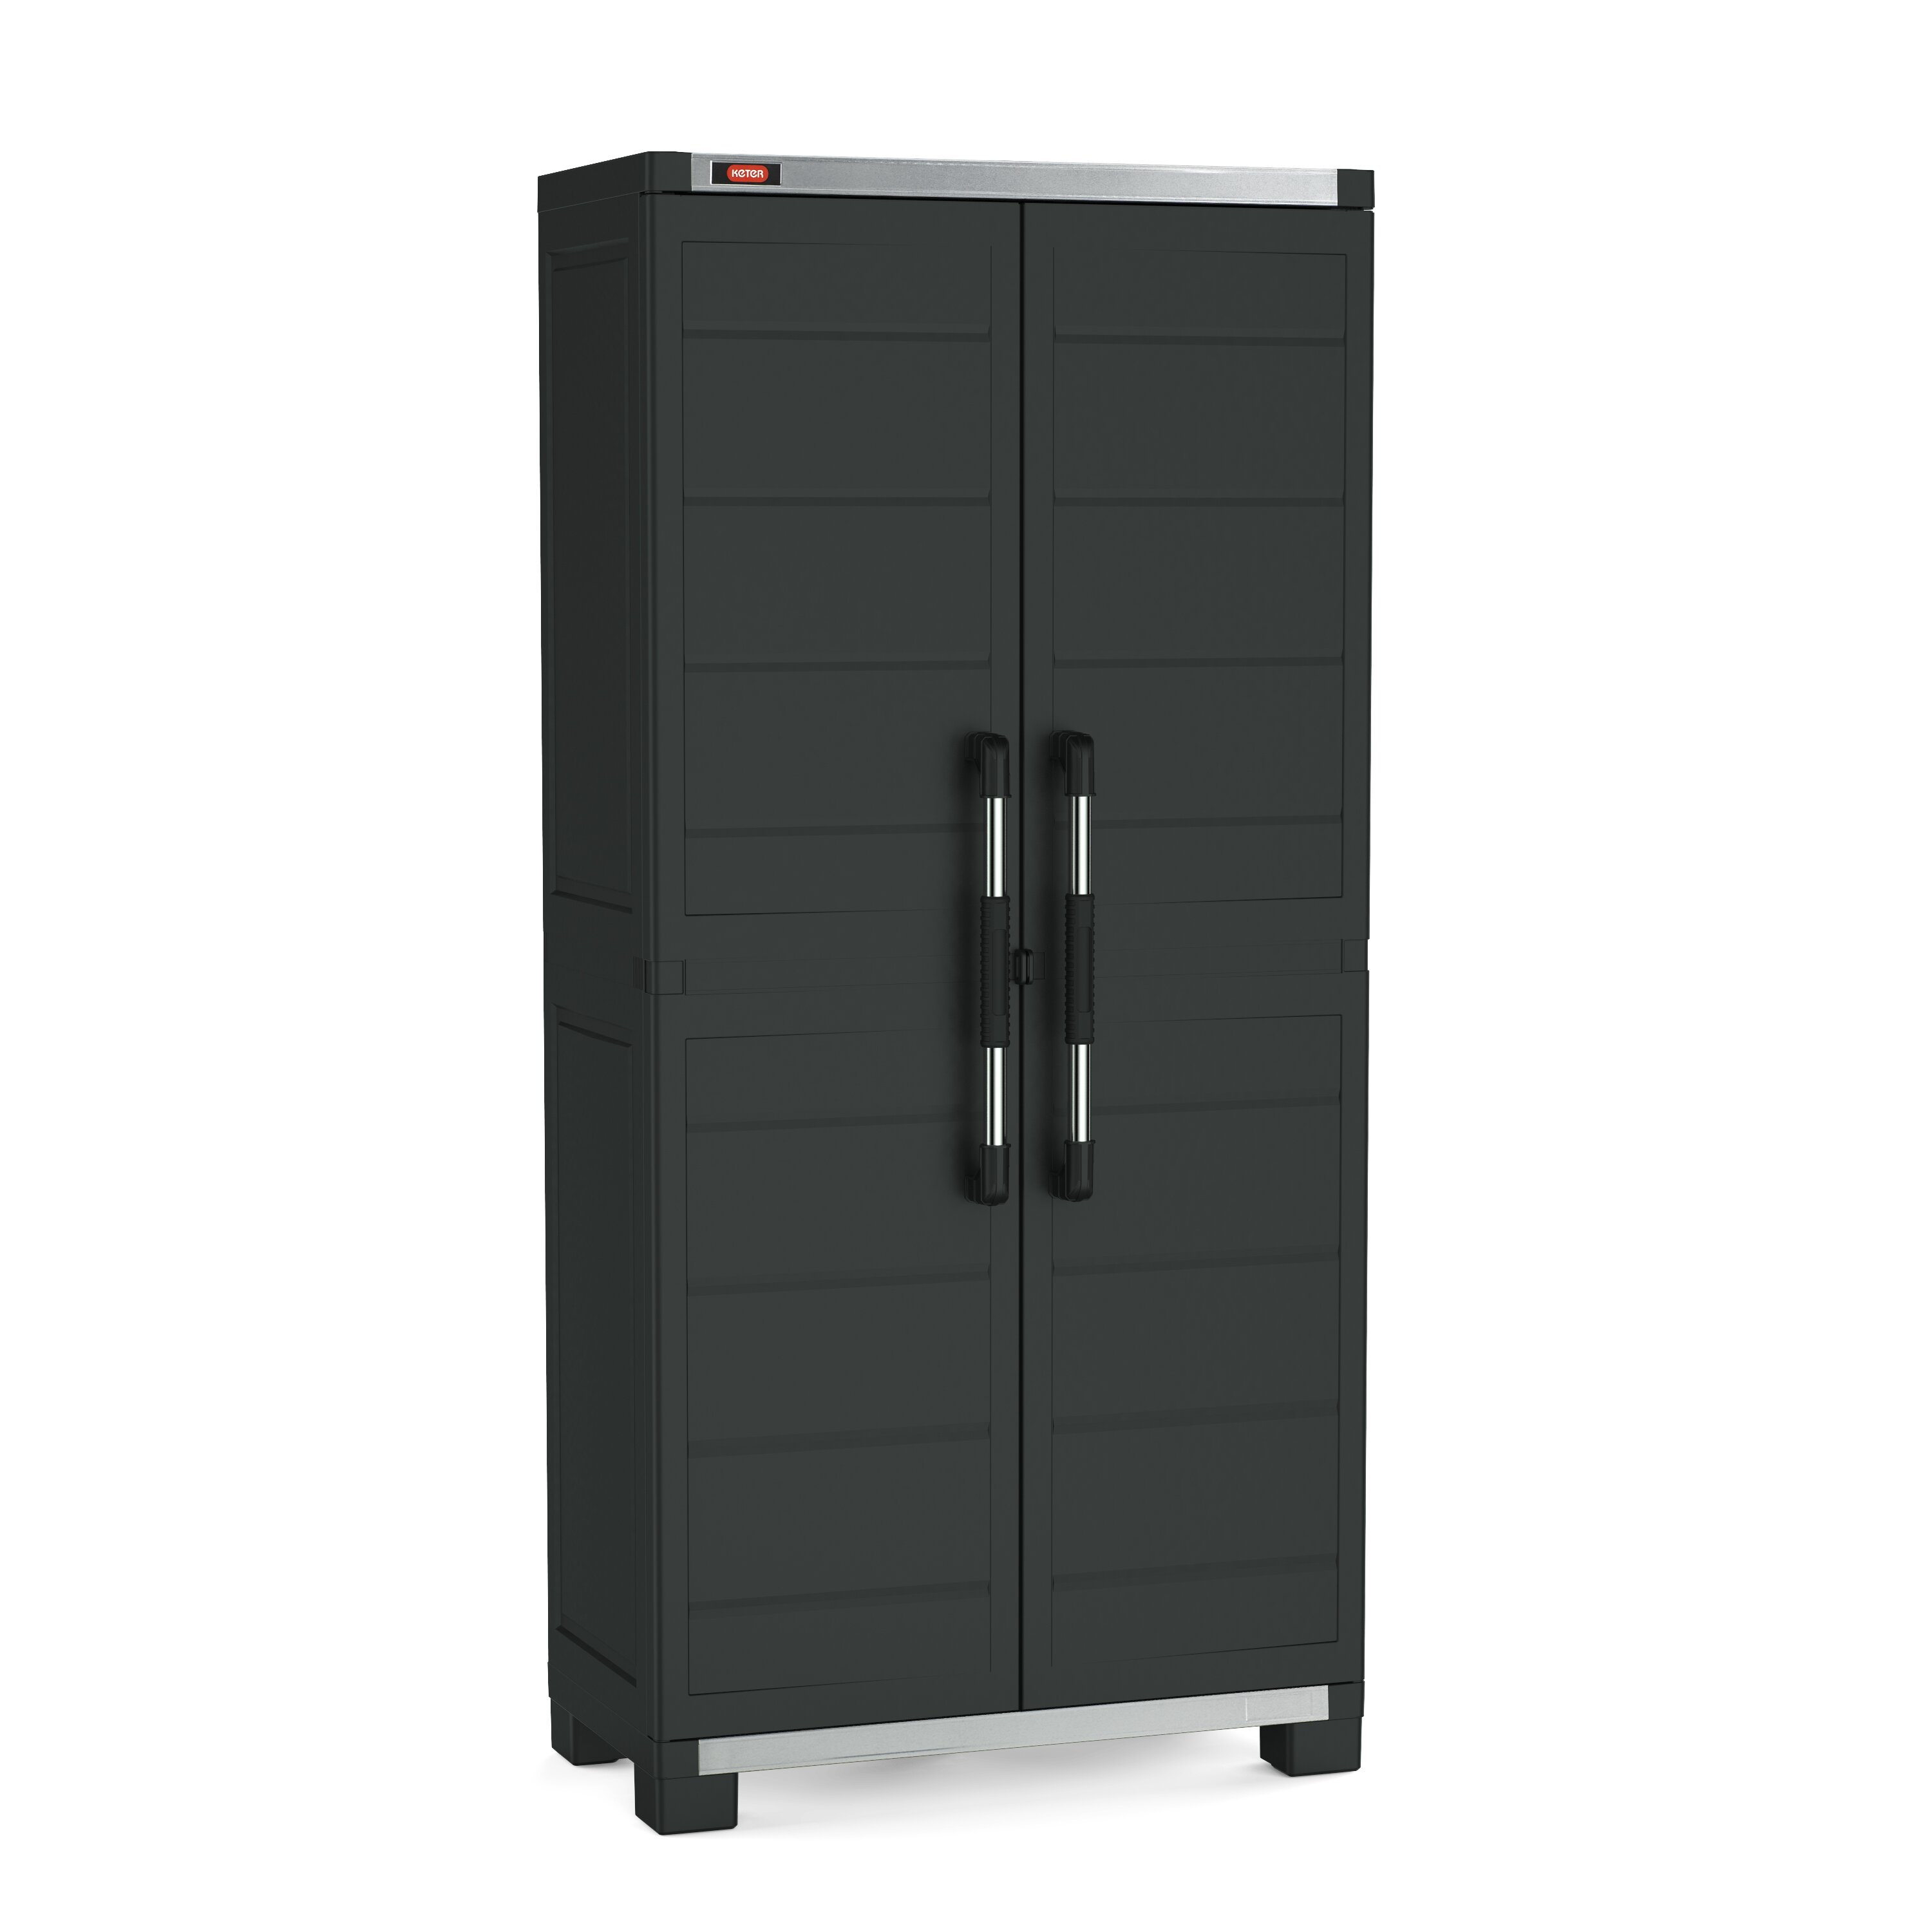 What types of storage solutions does Keter offer?